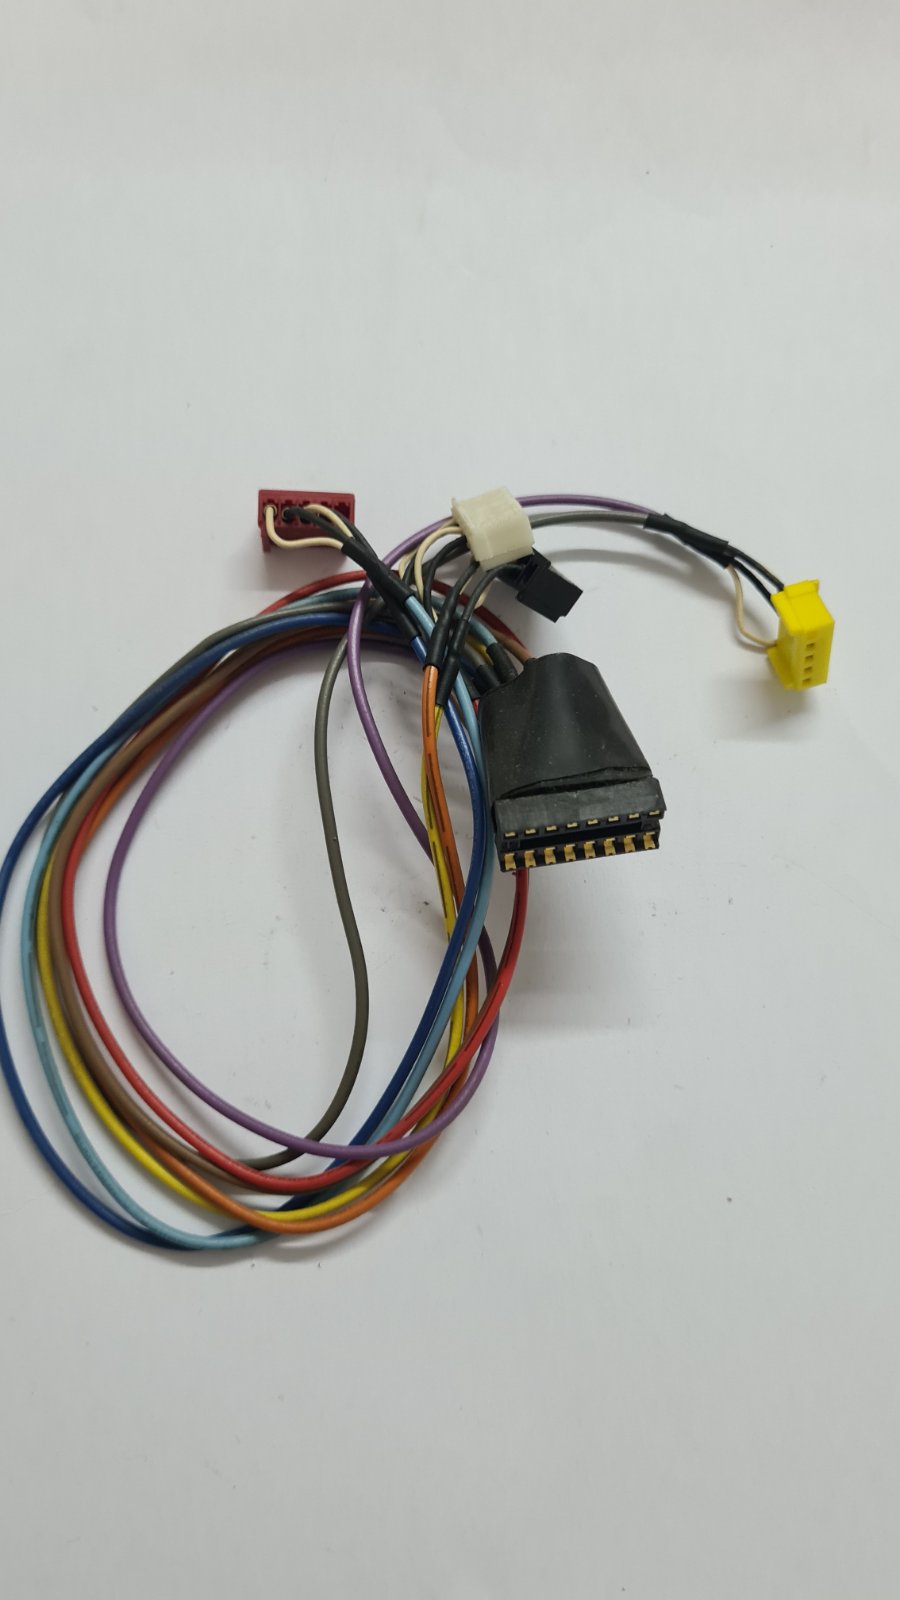 TASCAM ATR-60-8 HEAD HARNESS WITH MOLEX CONNECTORS